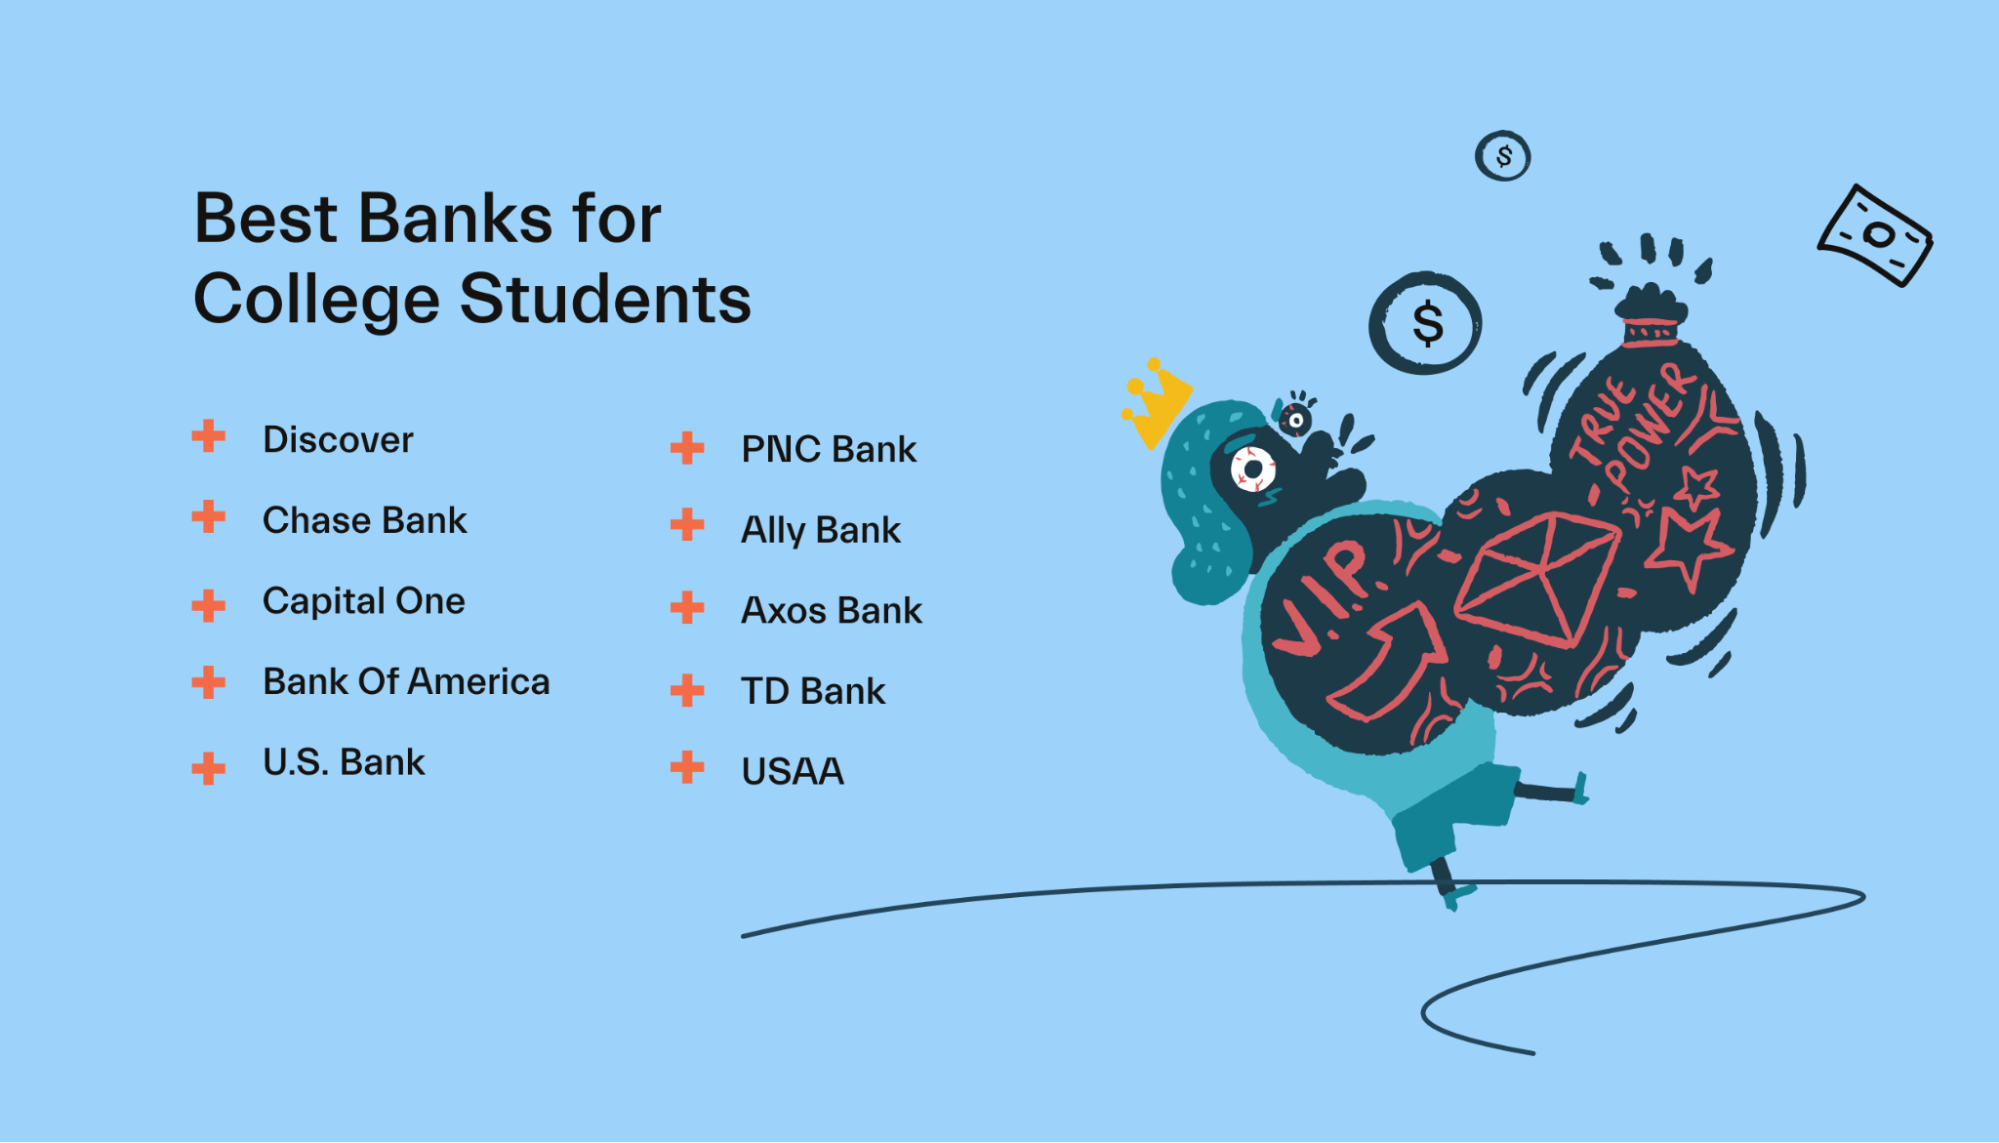 Best Banks for College Students